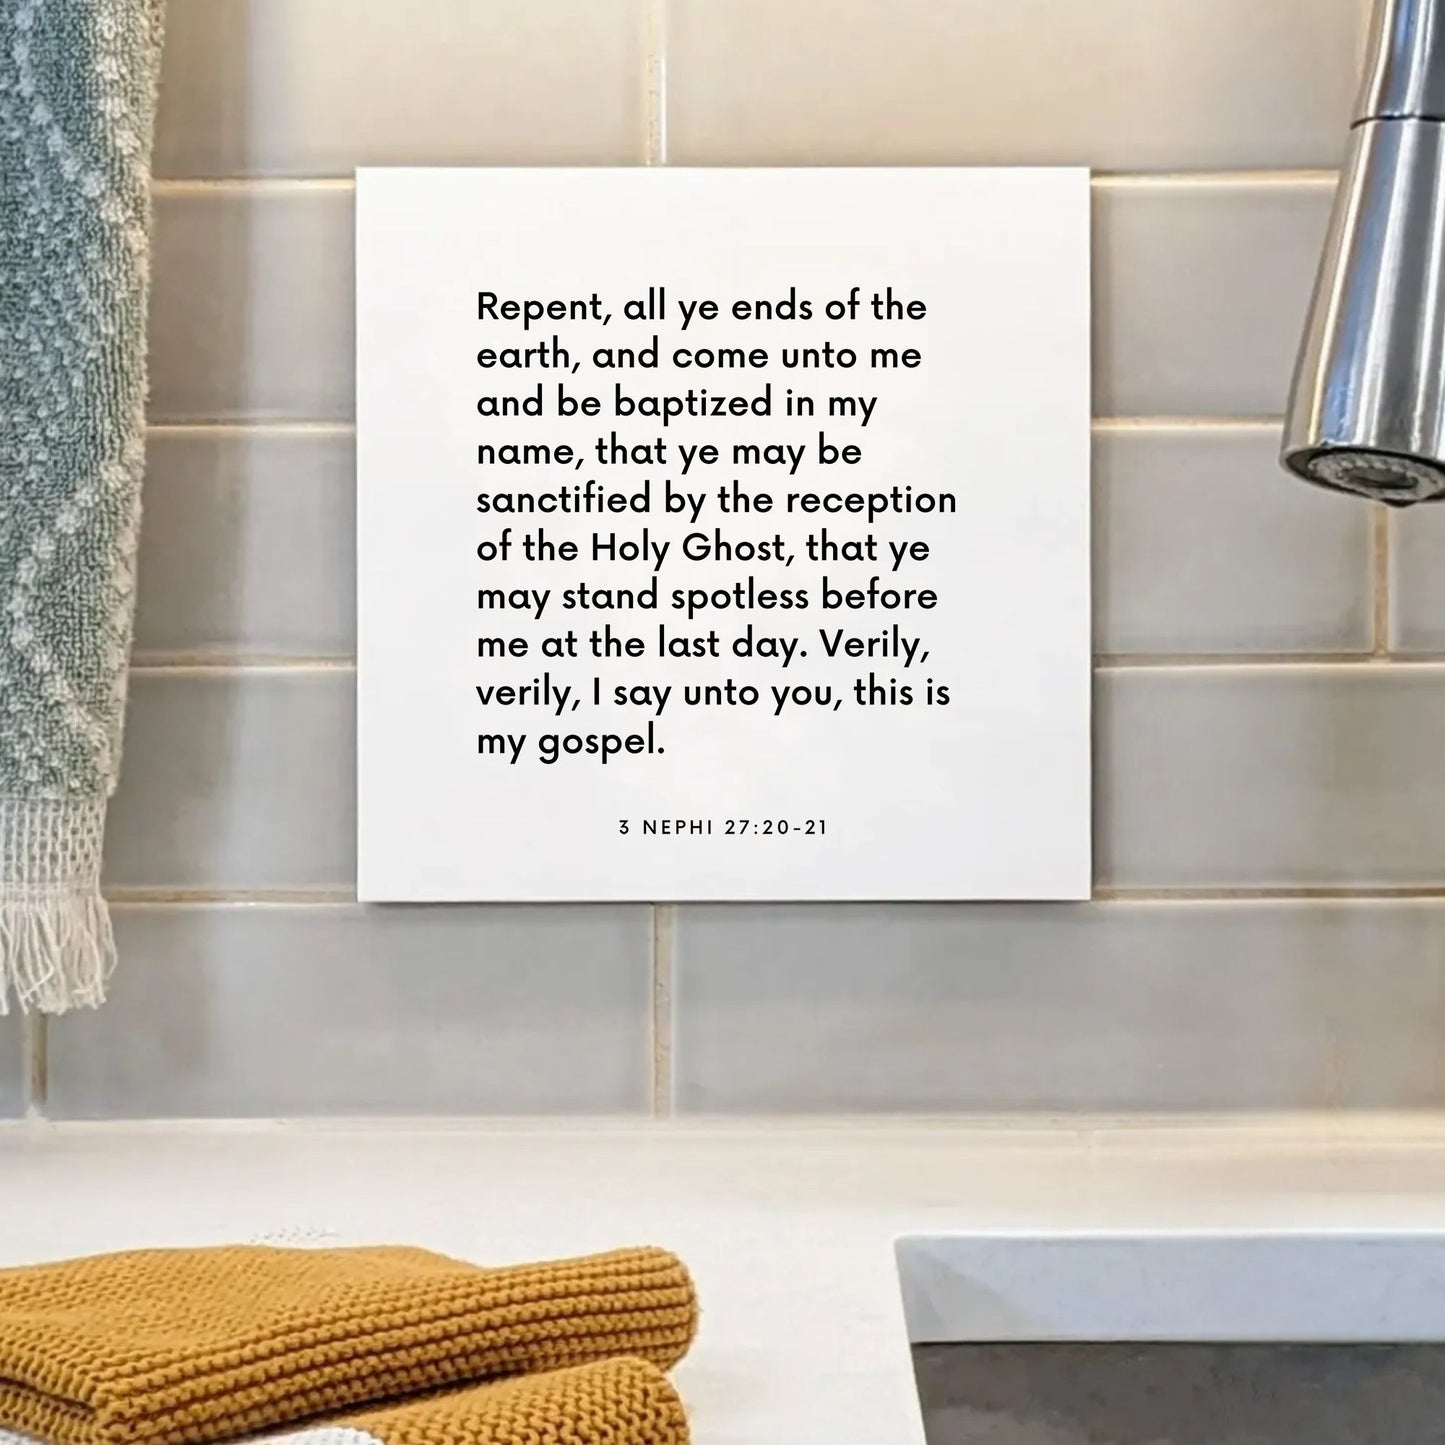 Sink mouting of the scripture tile for 3 Nephi 27:20-21 - "Repent, all ye ends of the earth, and come unto me"